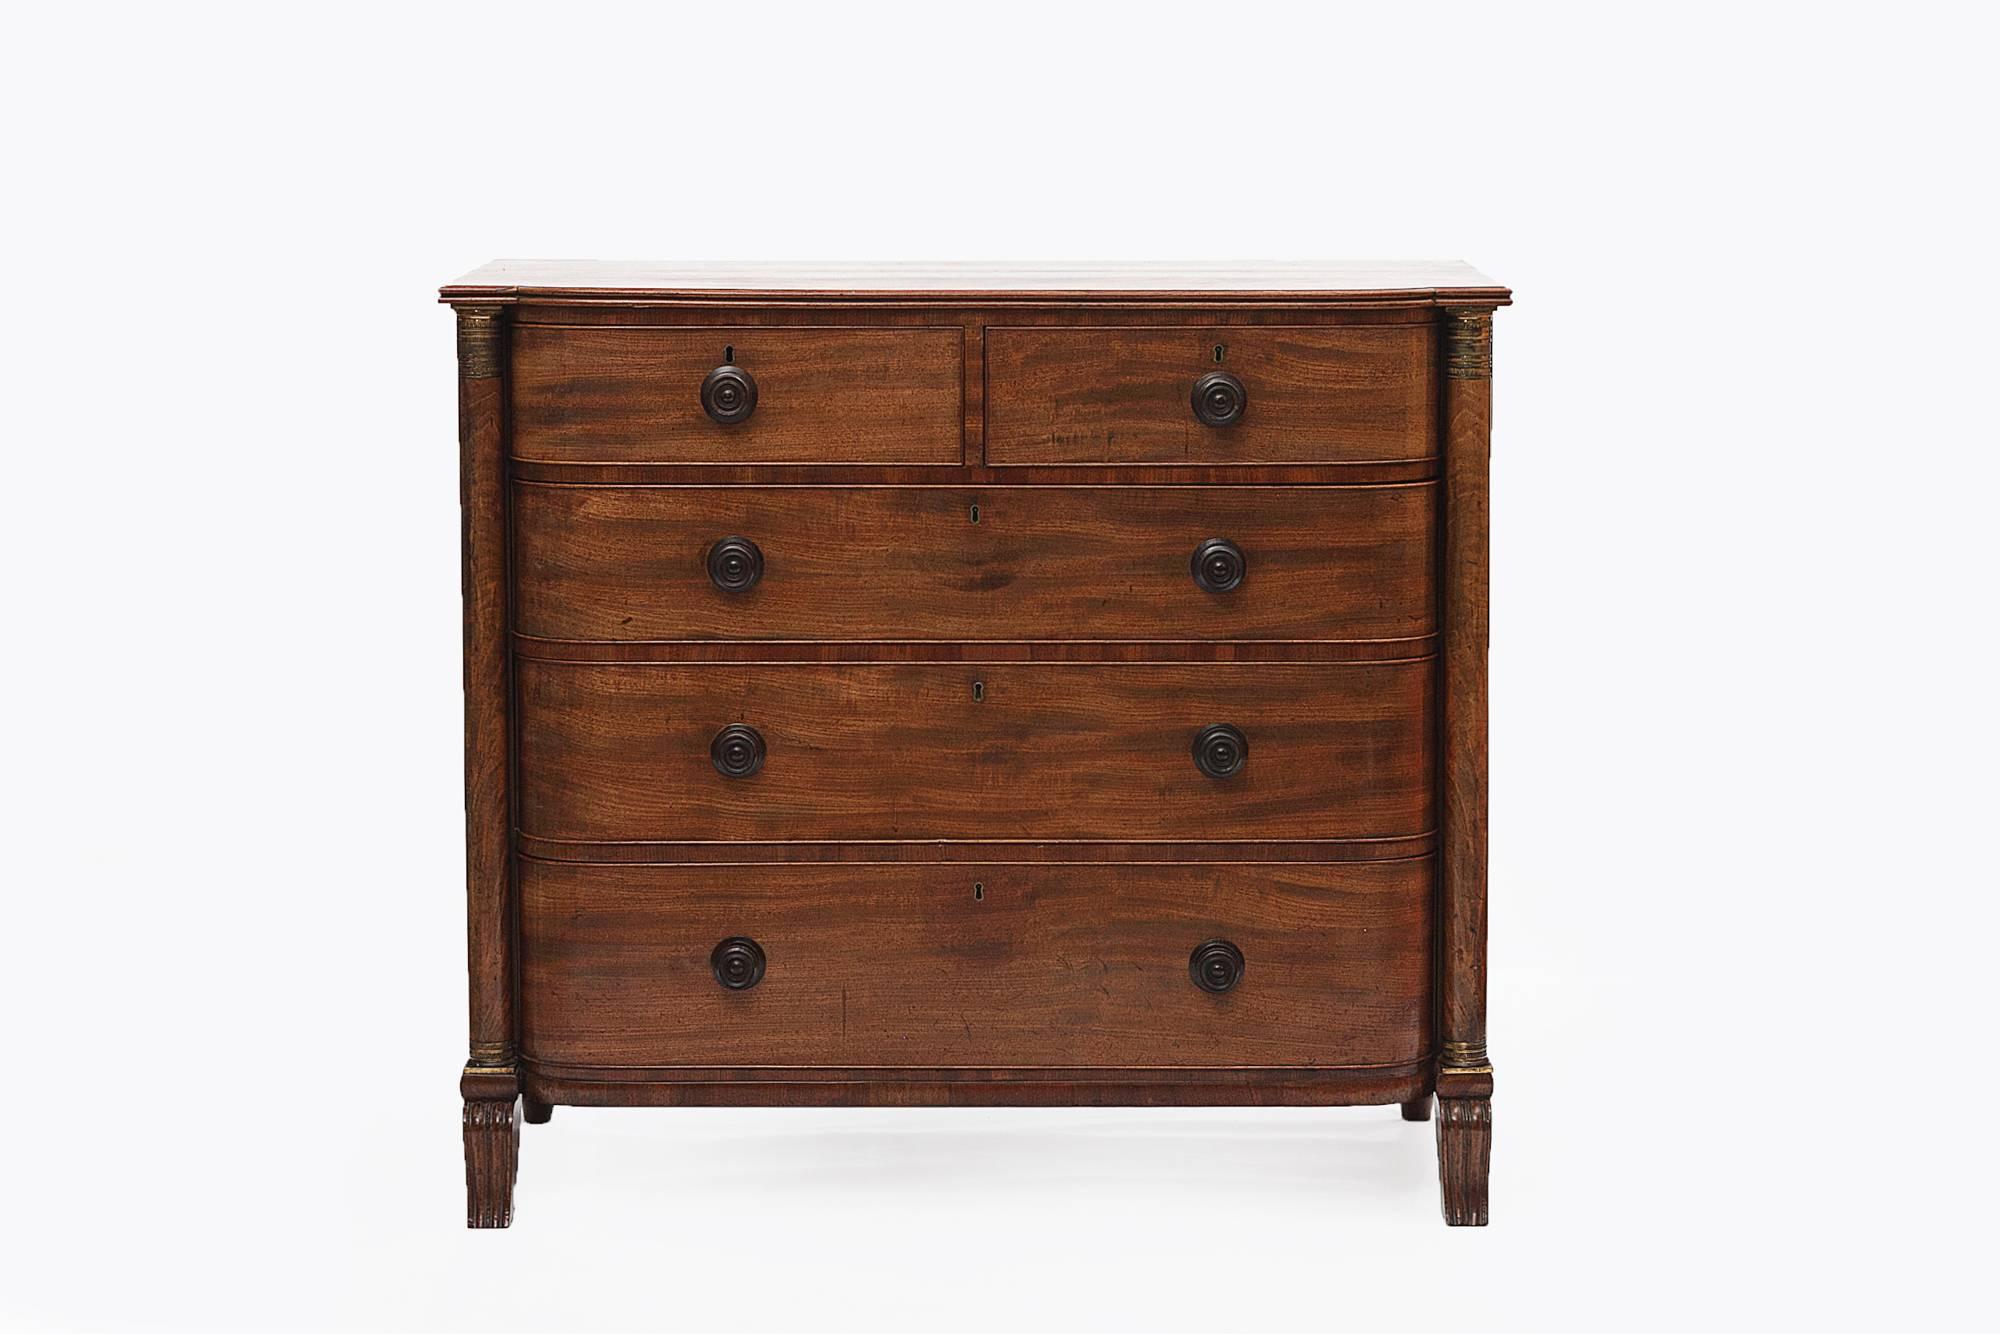 19th Century mahogany bow front chest of drawers, two short drawers over four long graduated drawers with ebonised knobs flanked by engaged columns with brass capitols.